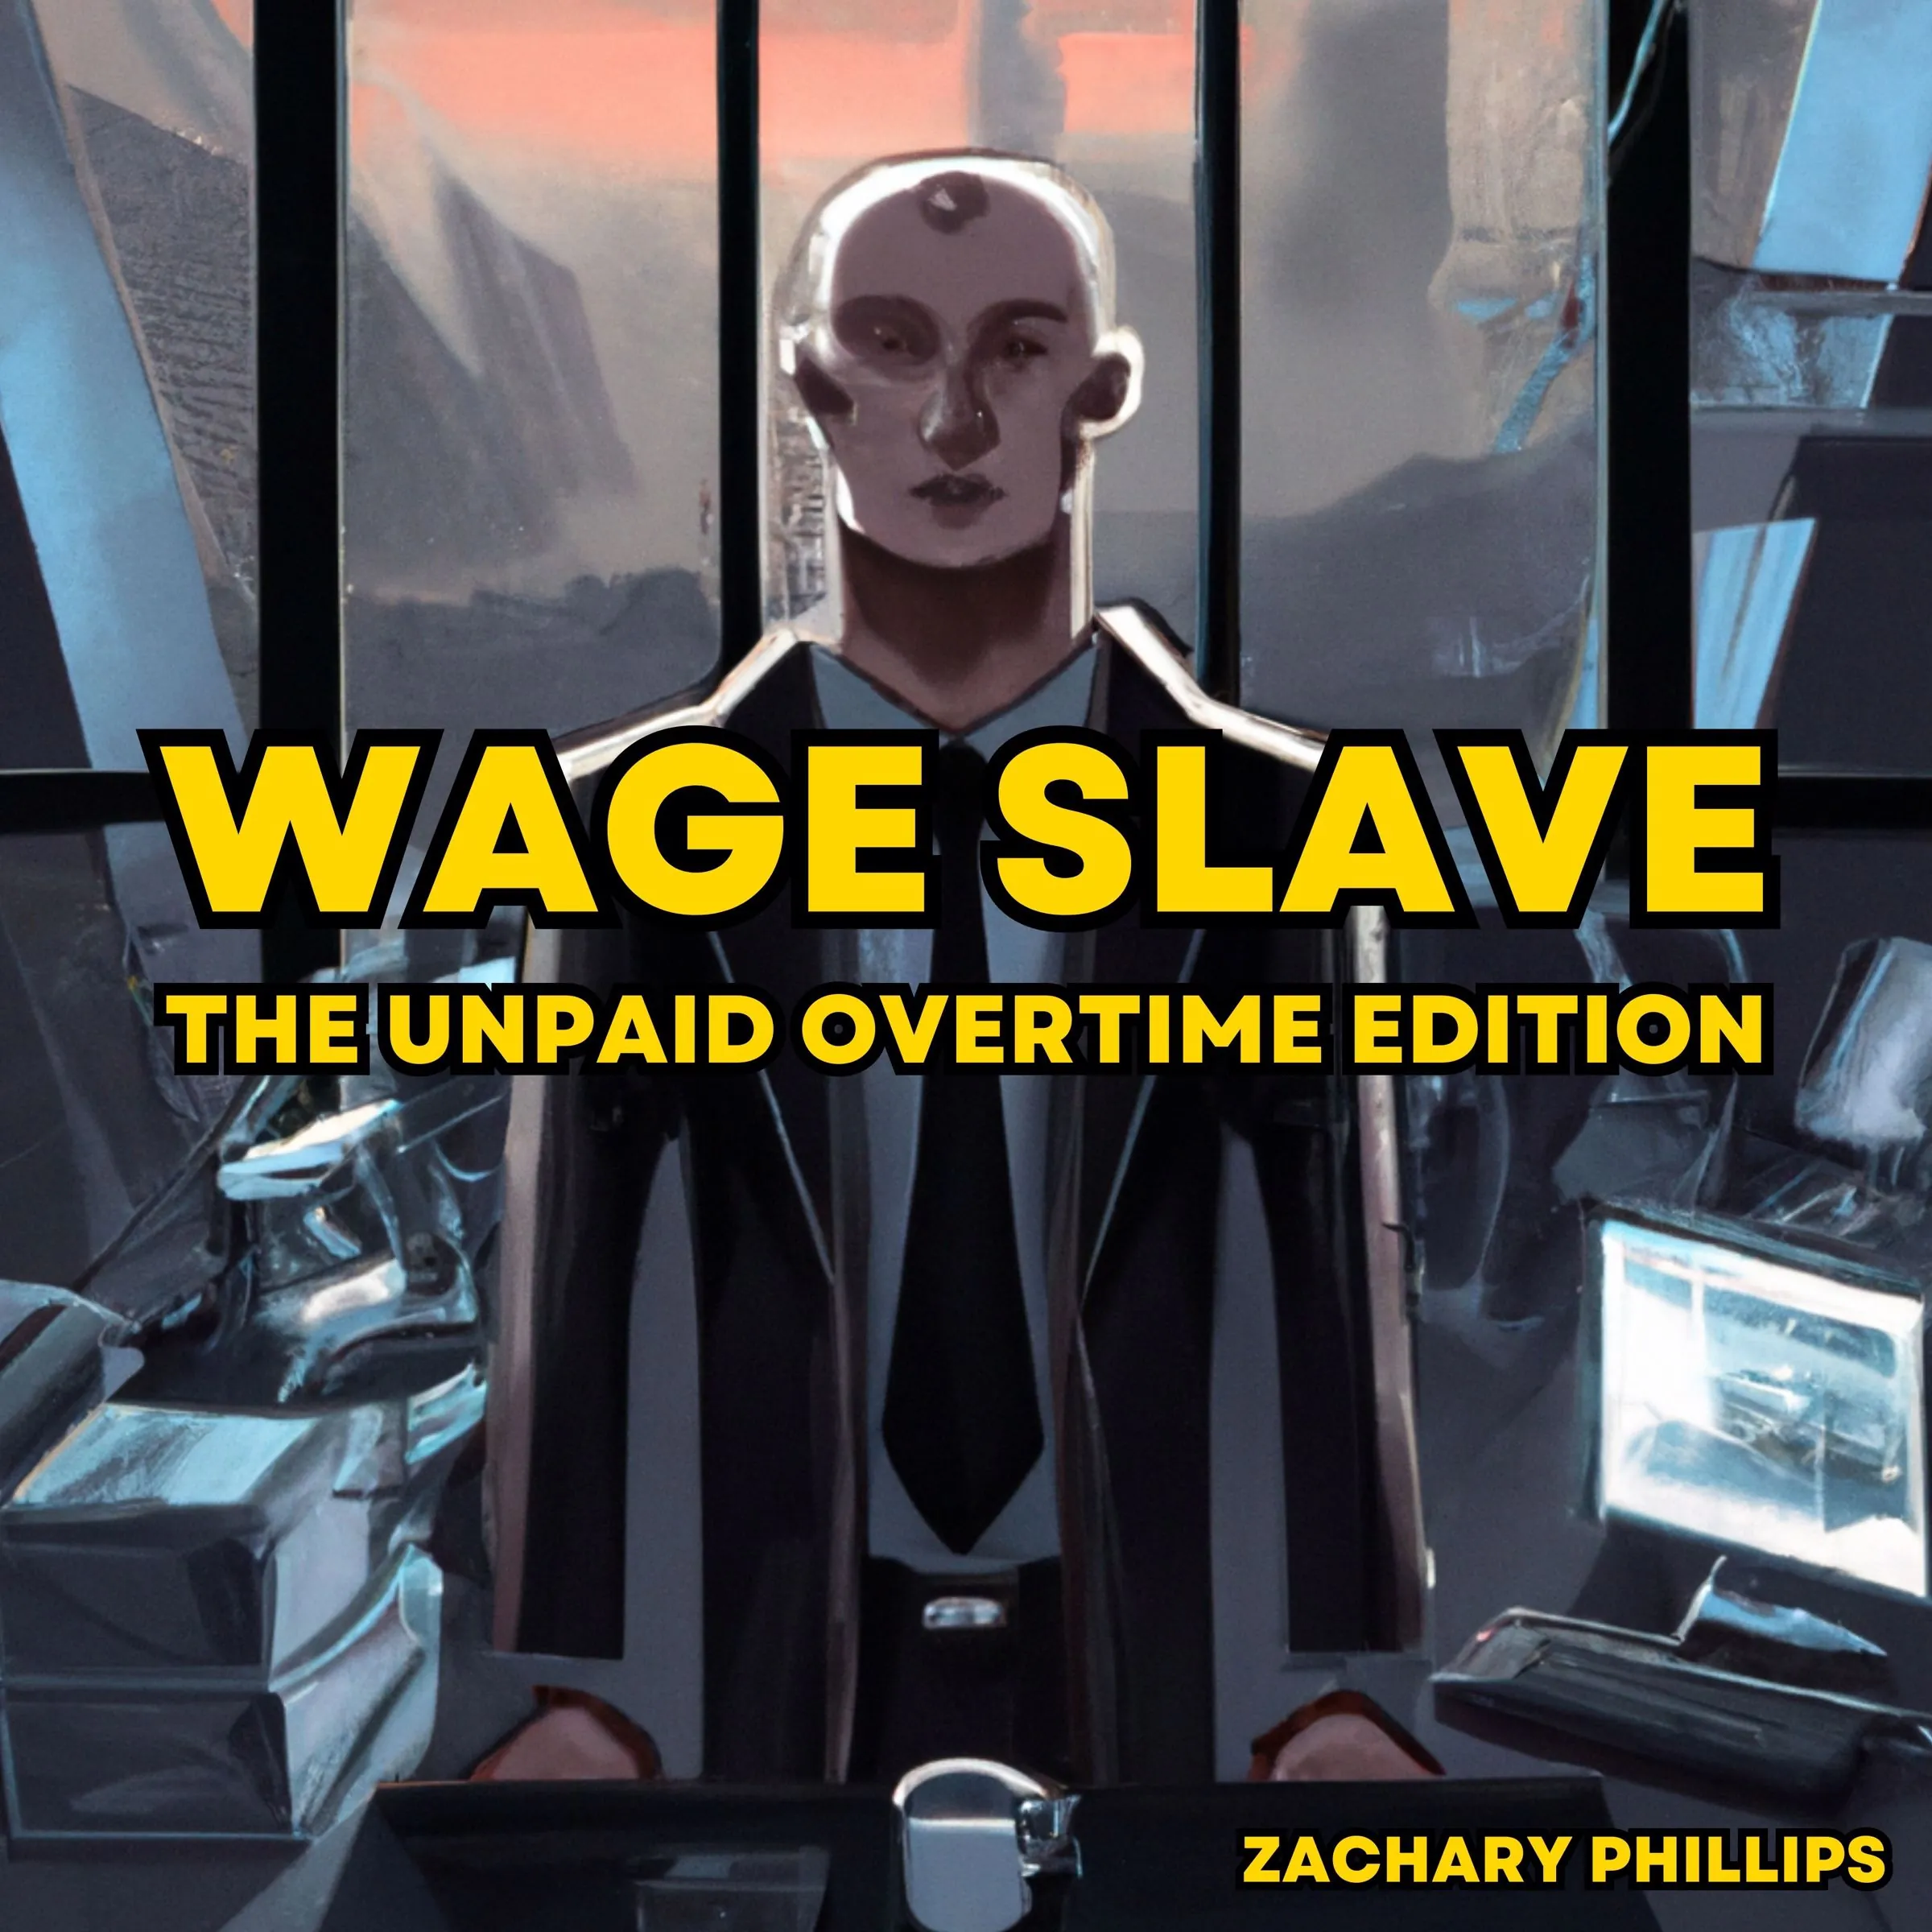 Wage Slave Audiobook by Zachary Phillips